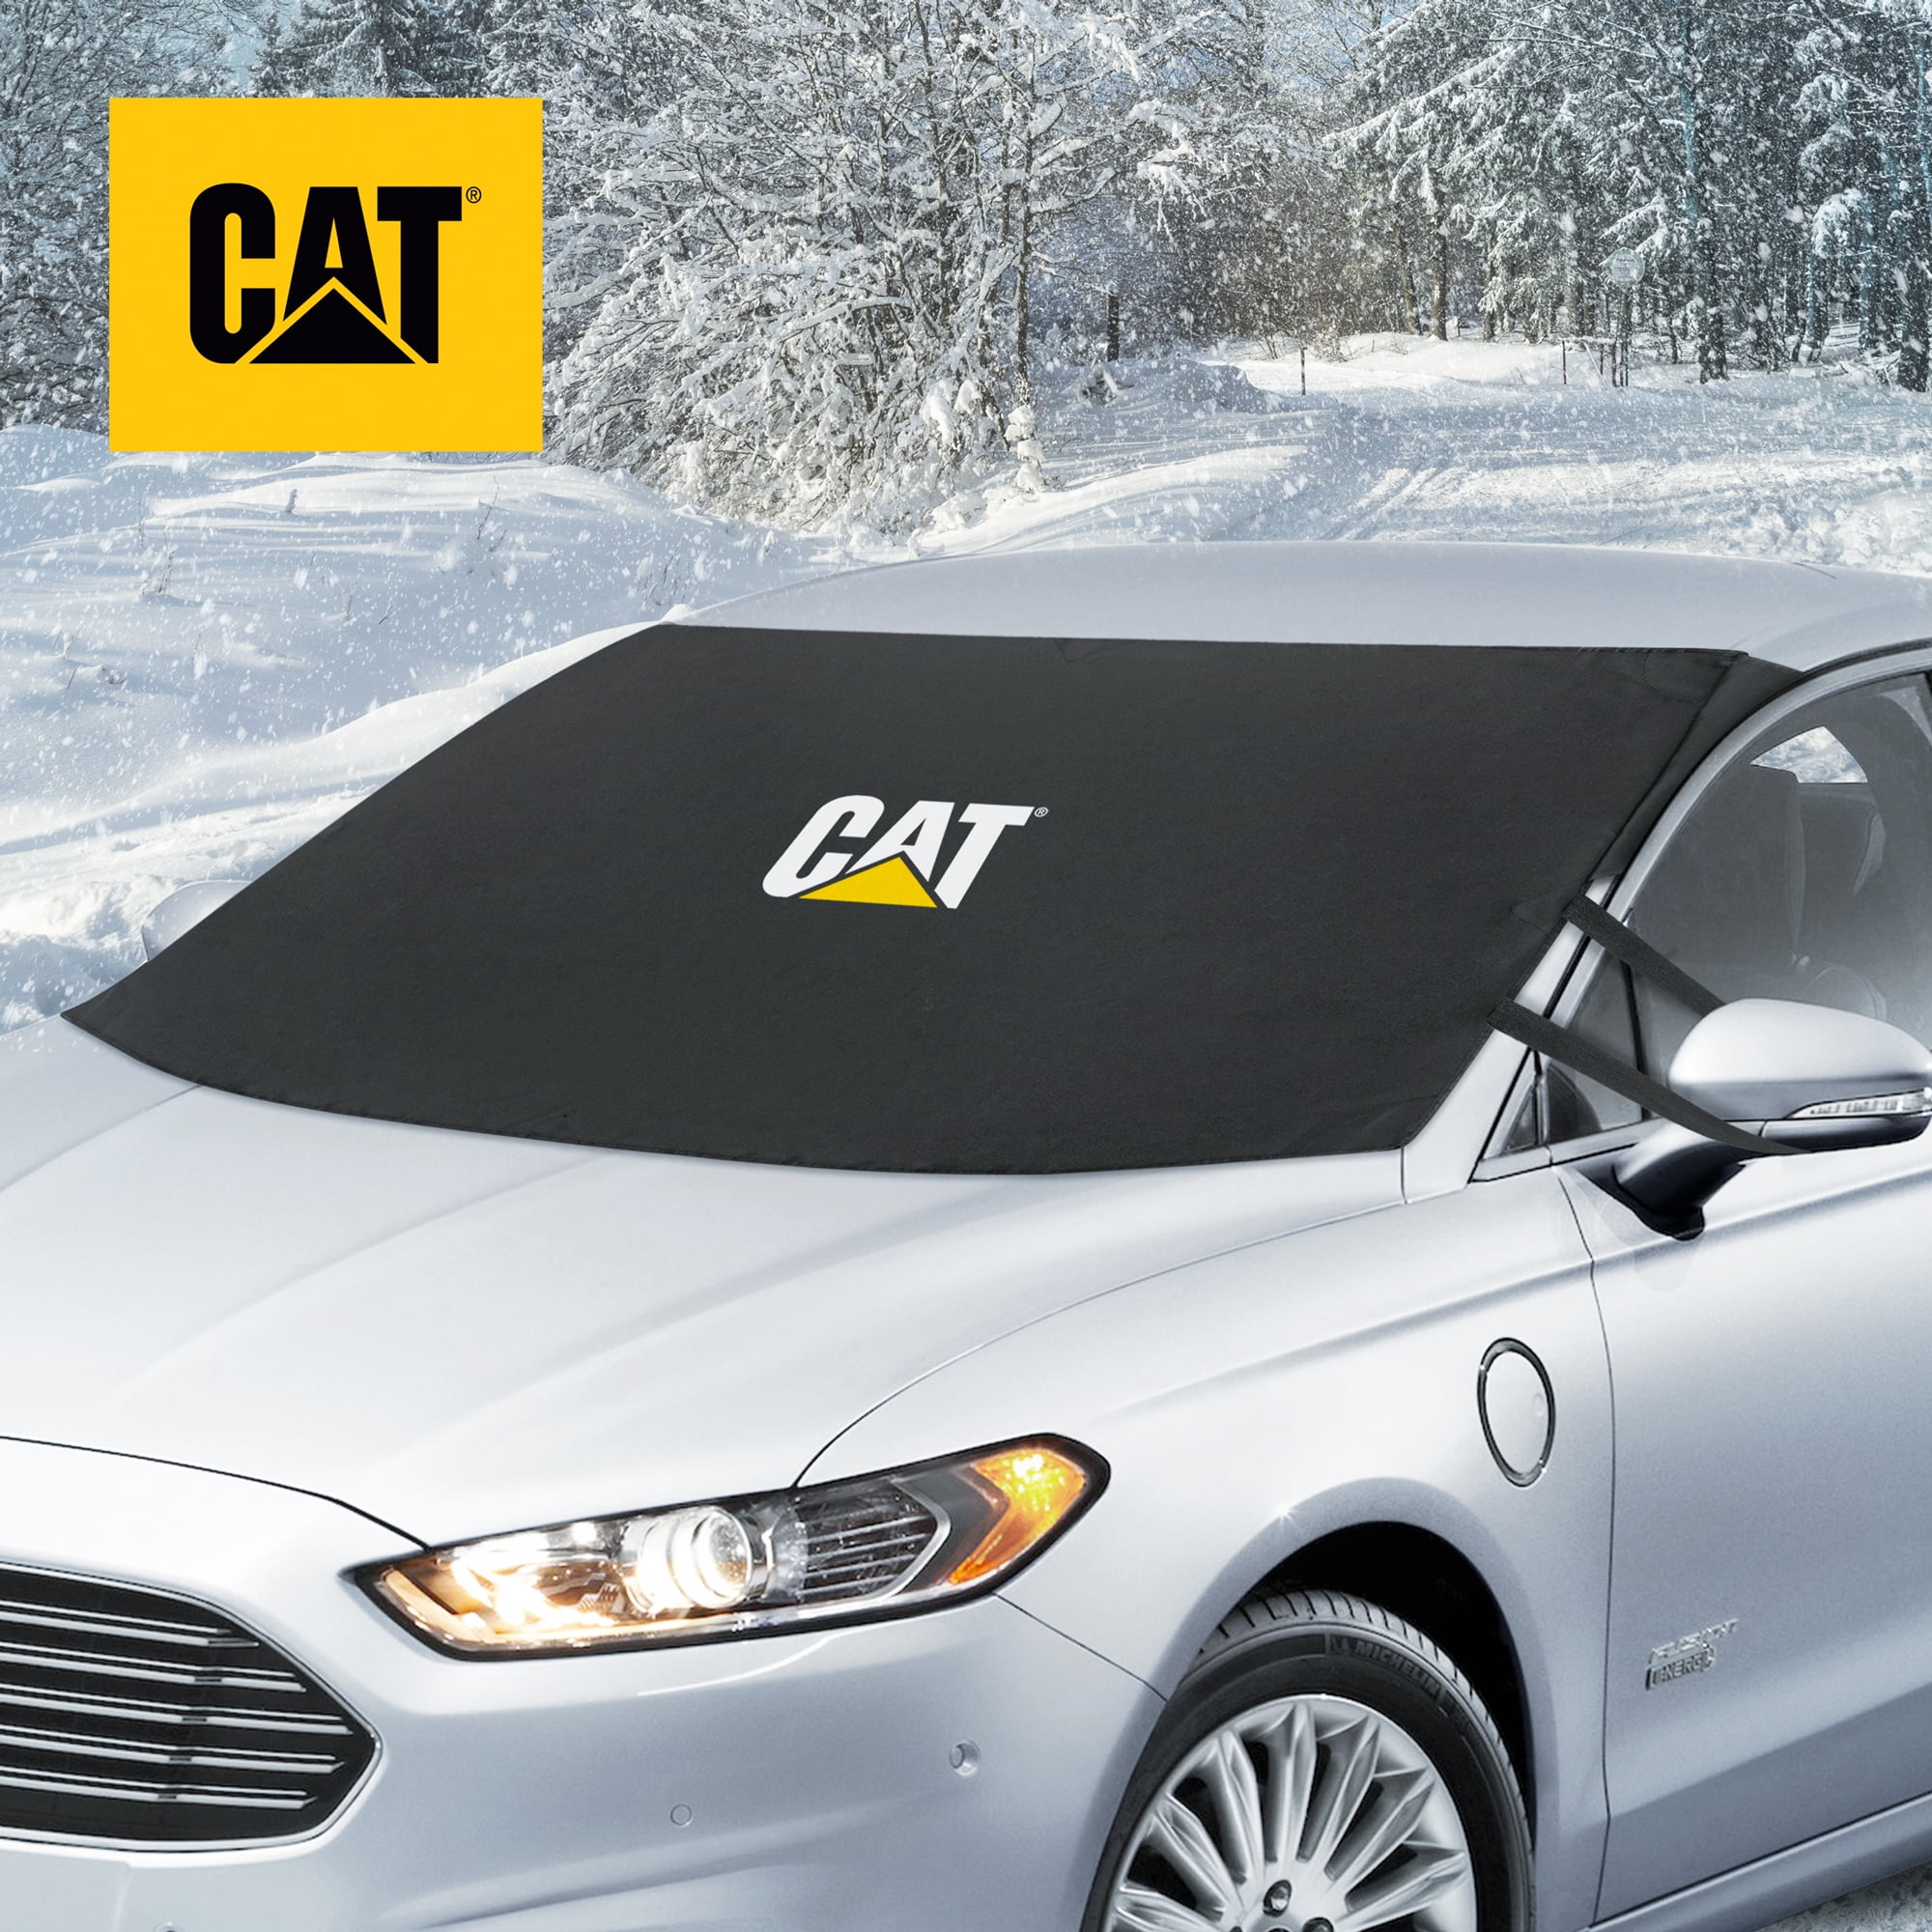 Caterpillar Frost Guard Winter Windshield Snow Cover Shield for Car Truck  SUV Van, Universal Size, Heavy Duty Material, Black 